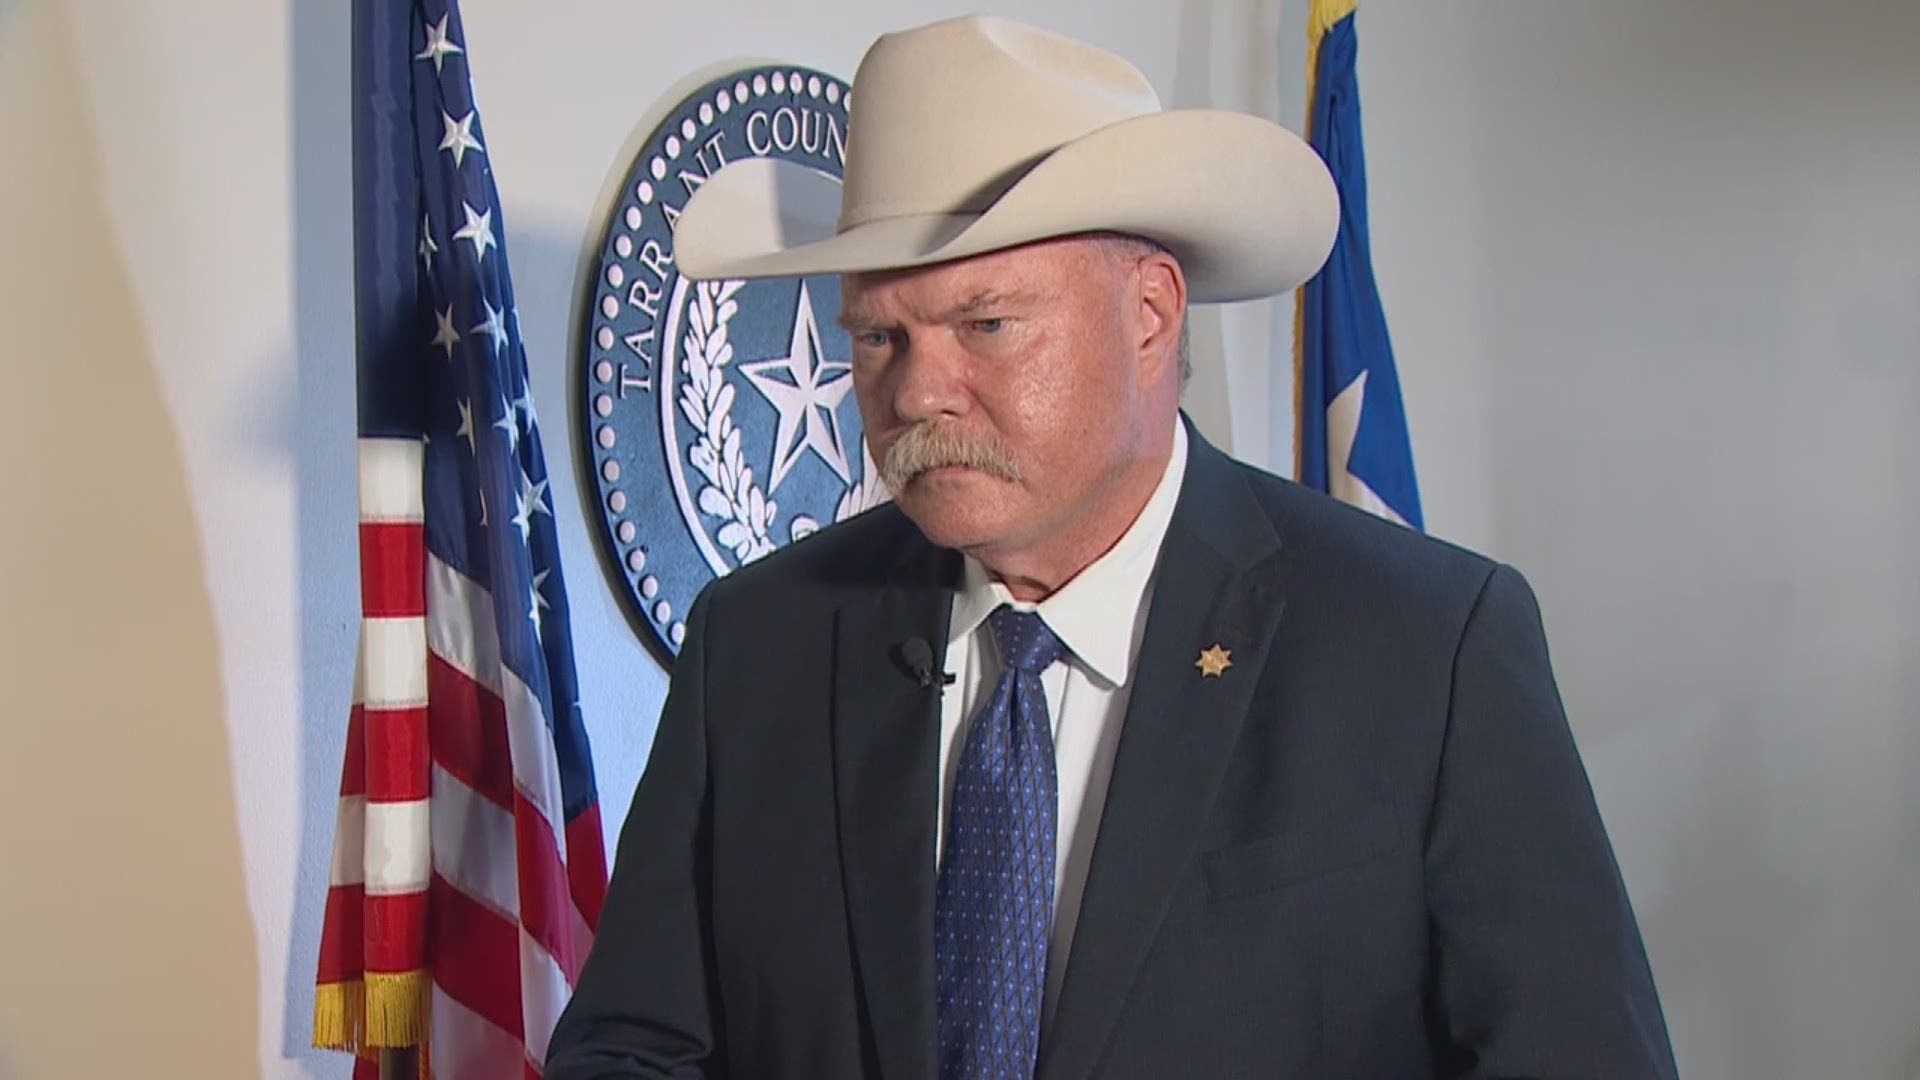 The Tarrant County sheriff spoke as part of a White House briefing in Washington D.C.